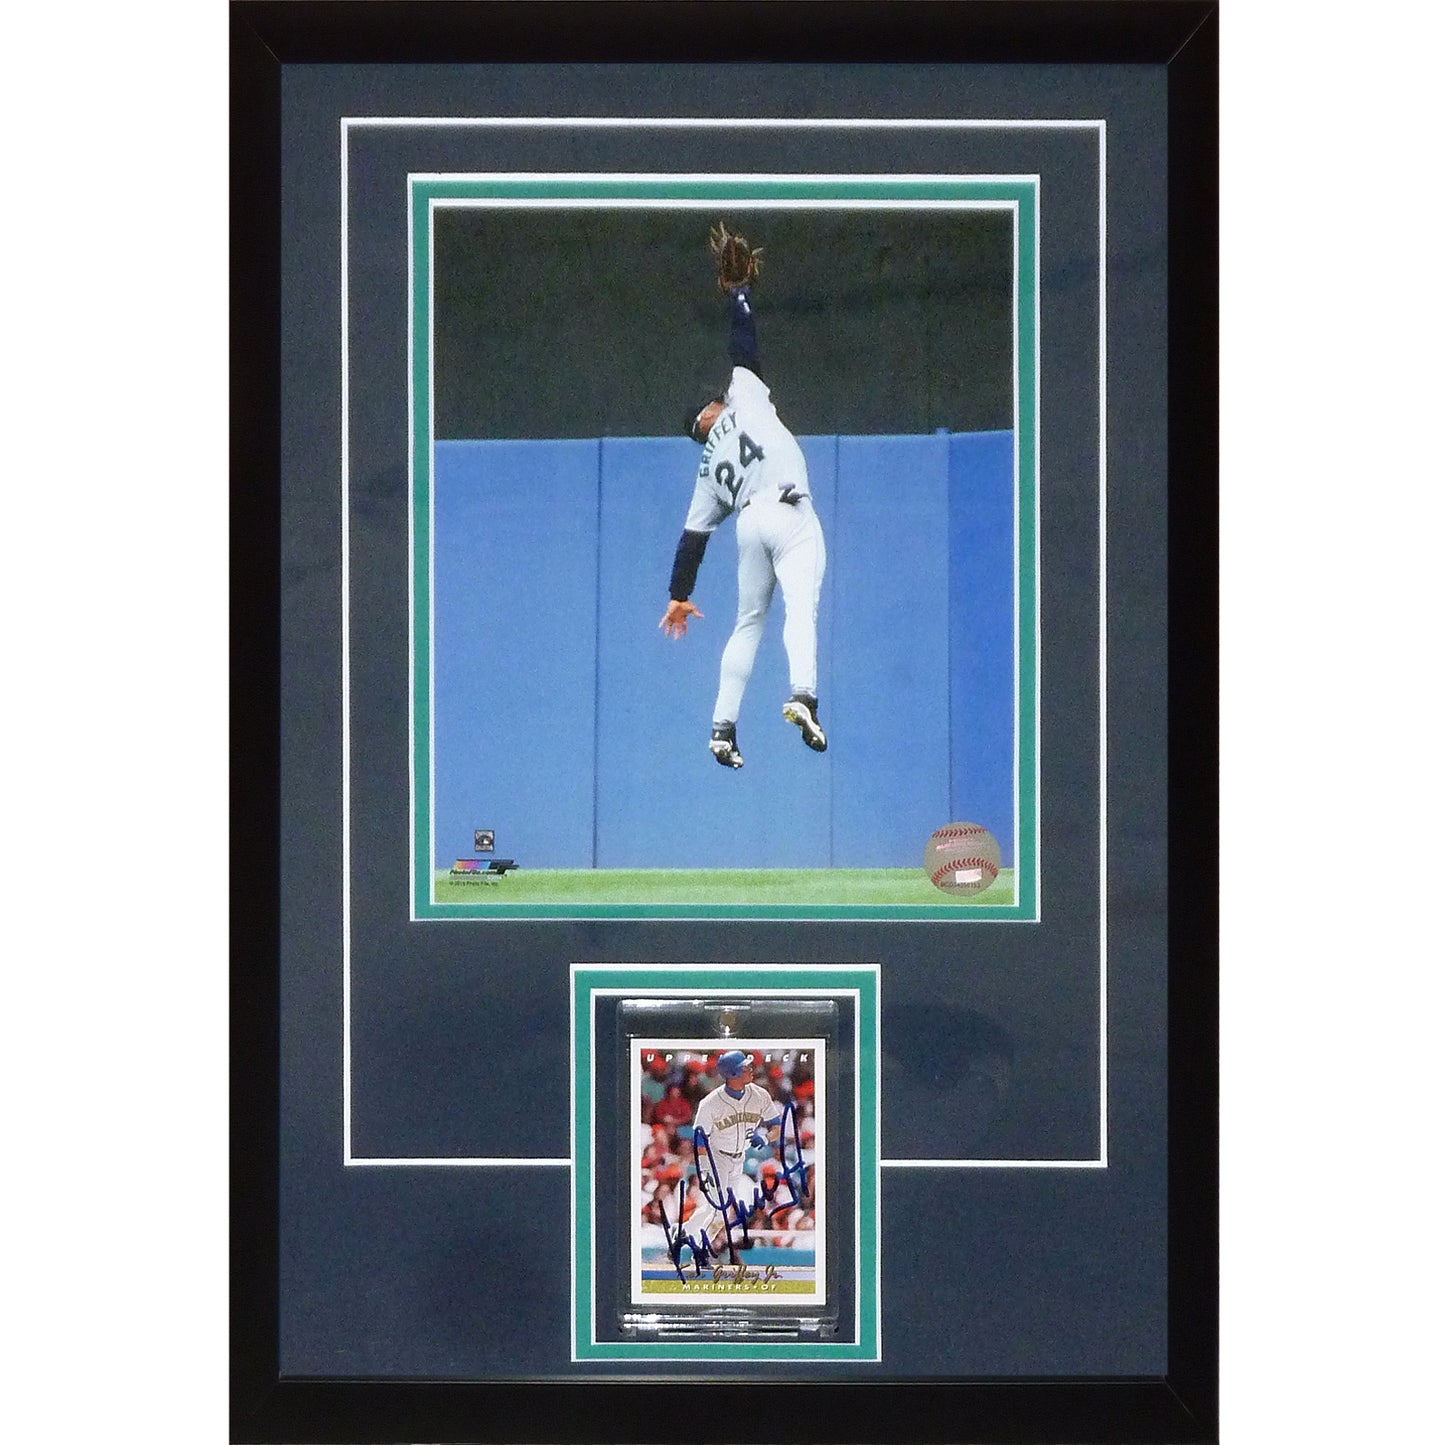 Ken Griffey Jr Autographed Baseball Card Deluxe Framed with Seattle Mariners 8x10 Photo – JSA